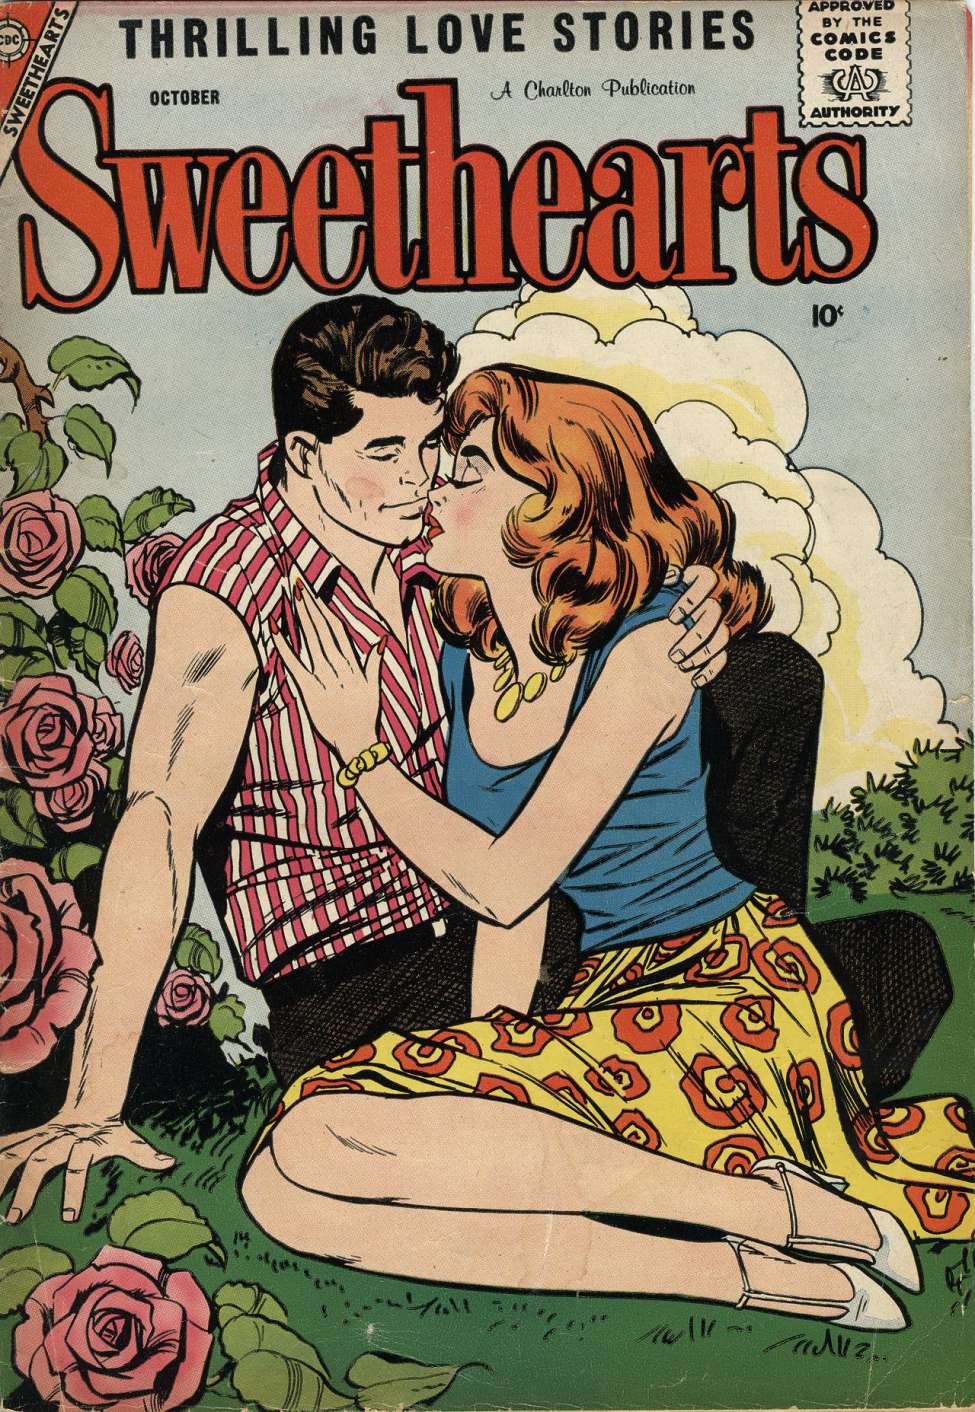 Comic Book Cover For Sweethearts 45 - Version 2